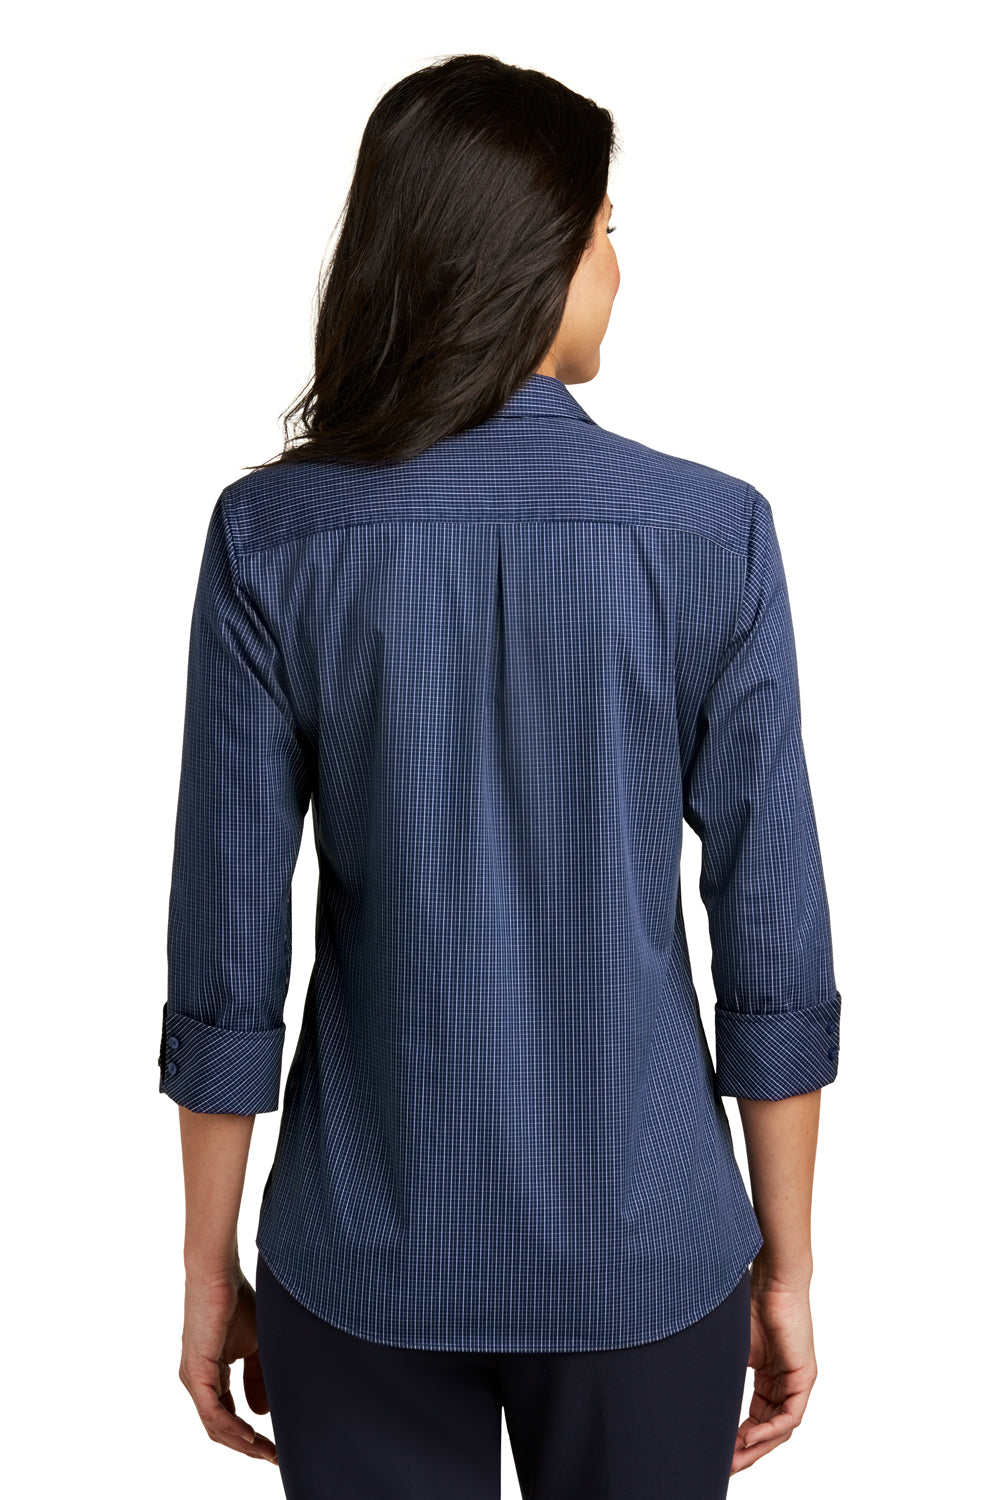 Port Authority LW643 Womens Easy Care Wrinkle Resistant 3/4 Sleeve Button Down Shirt Navy Blue/Heritage Blue Back